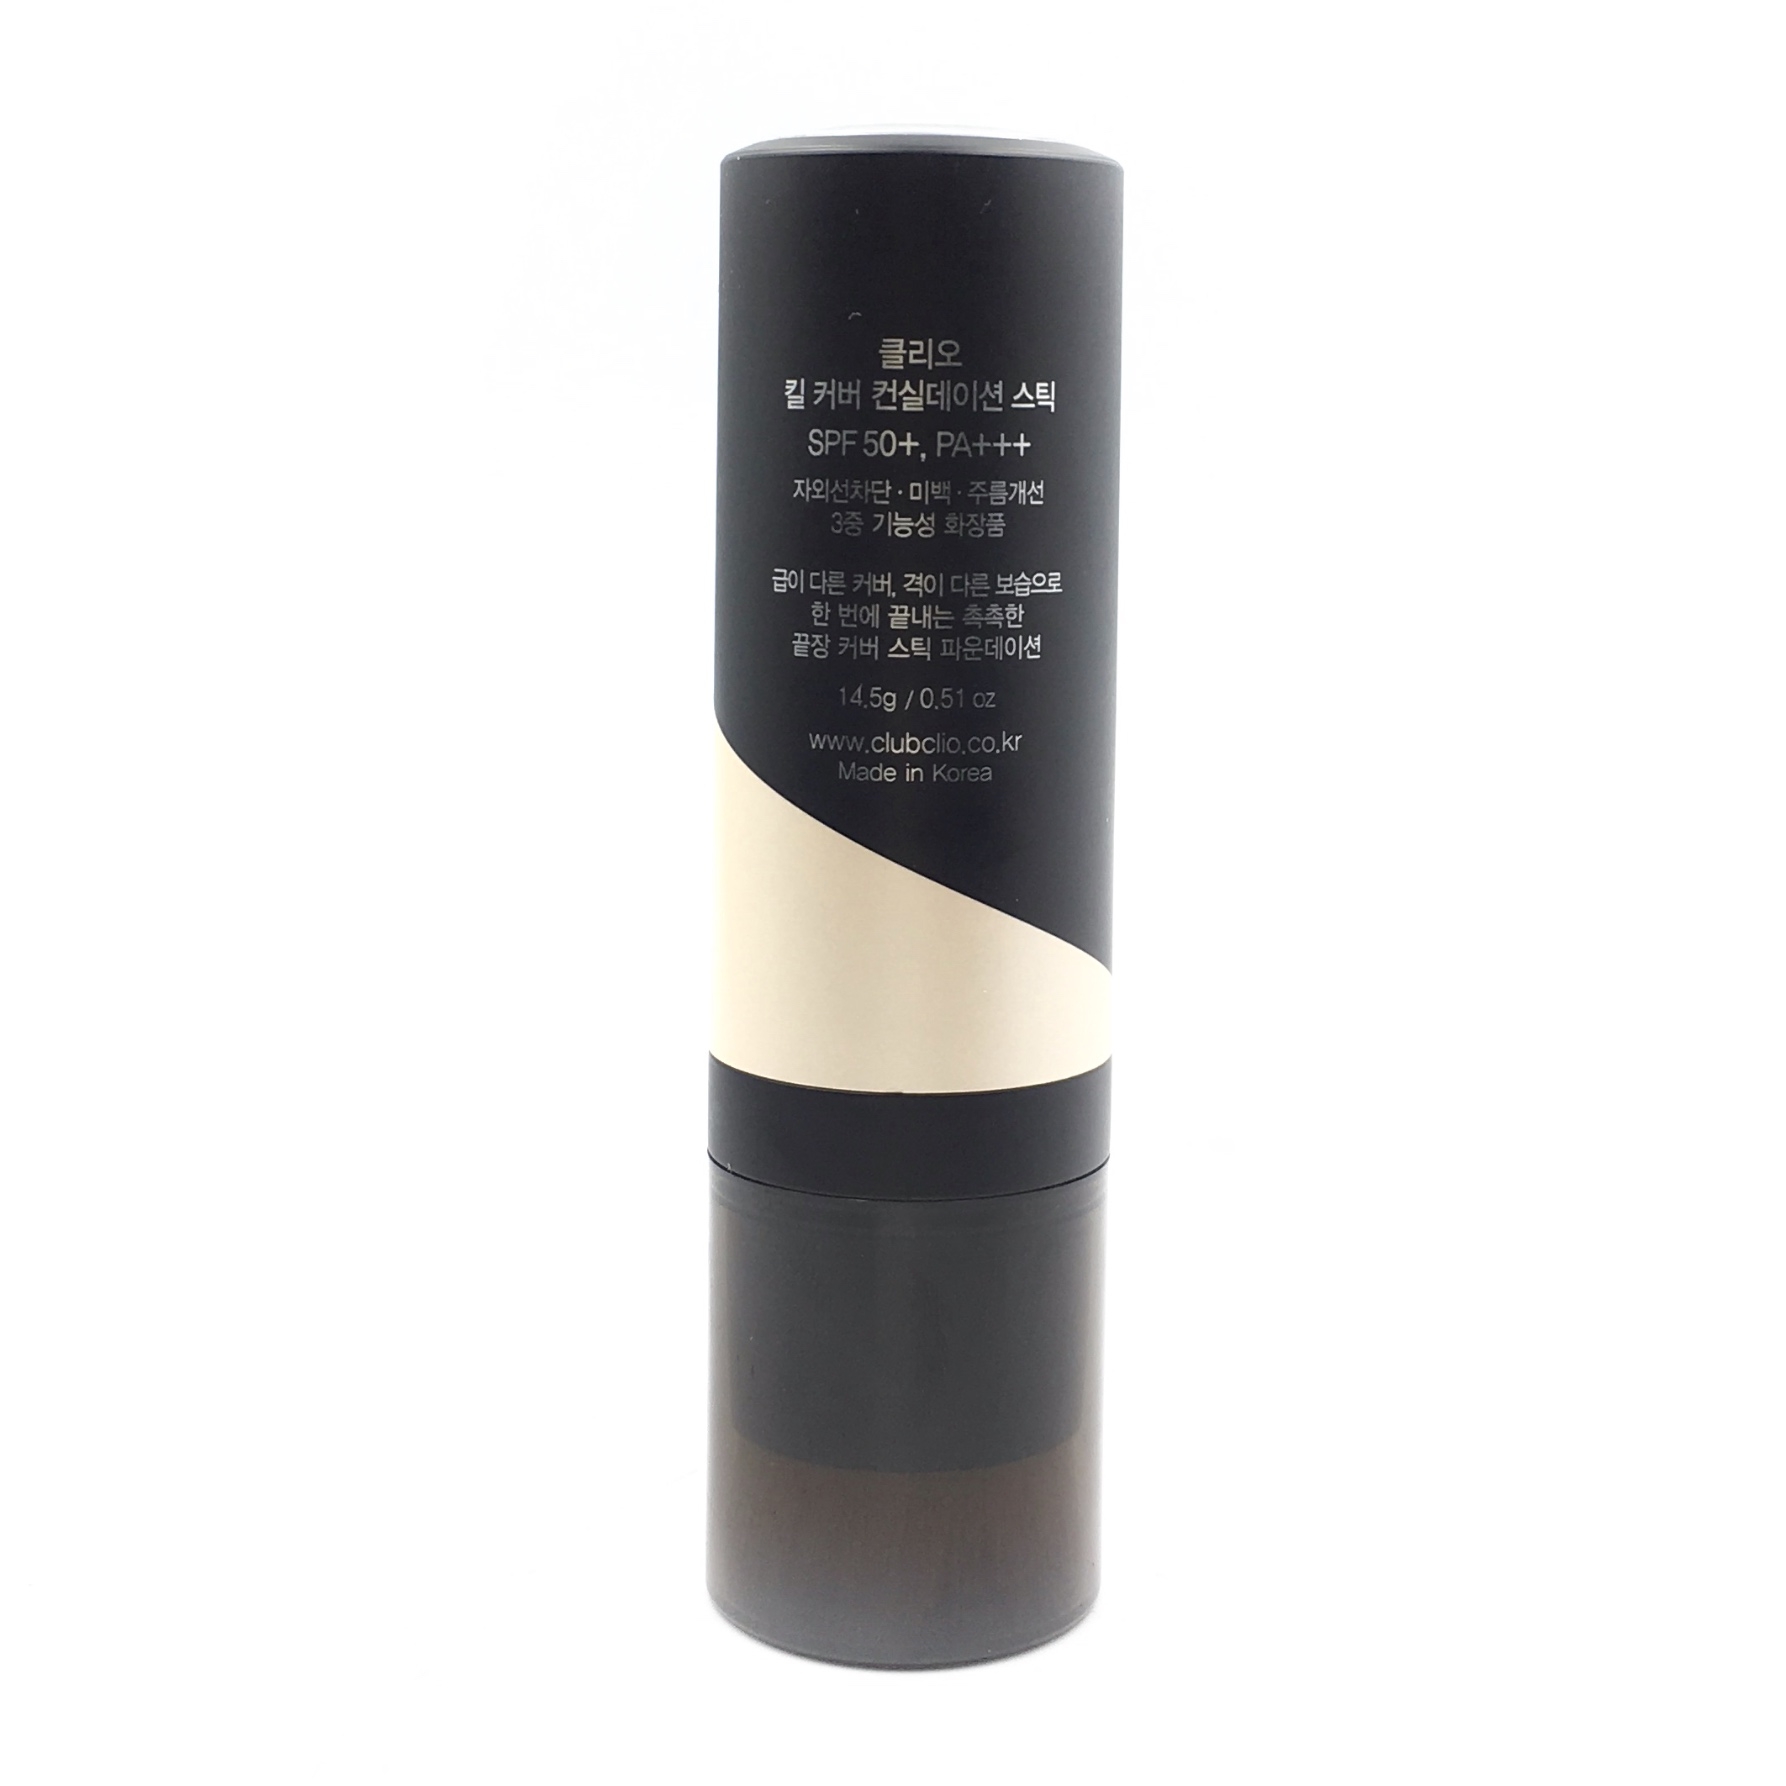 Clio Ginger Kill Cover Conceal - Dation Stick SPF 50+PA +++ Faces